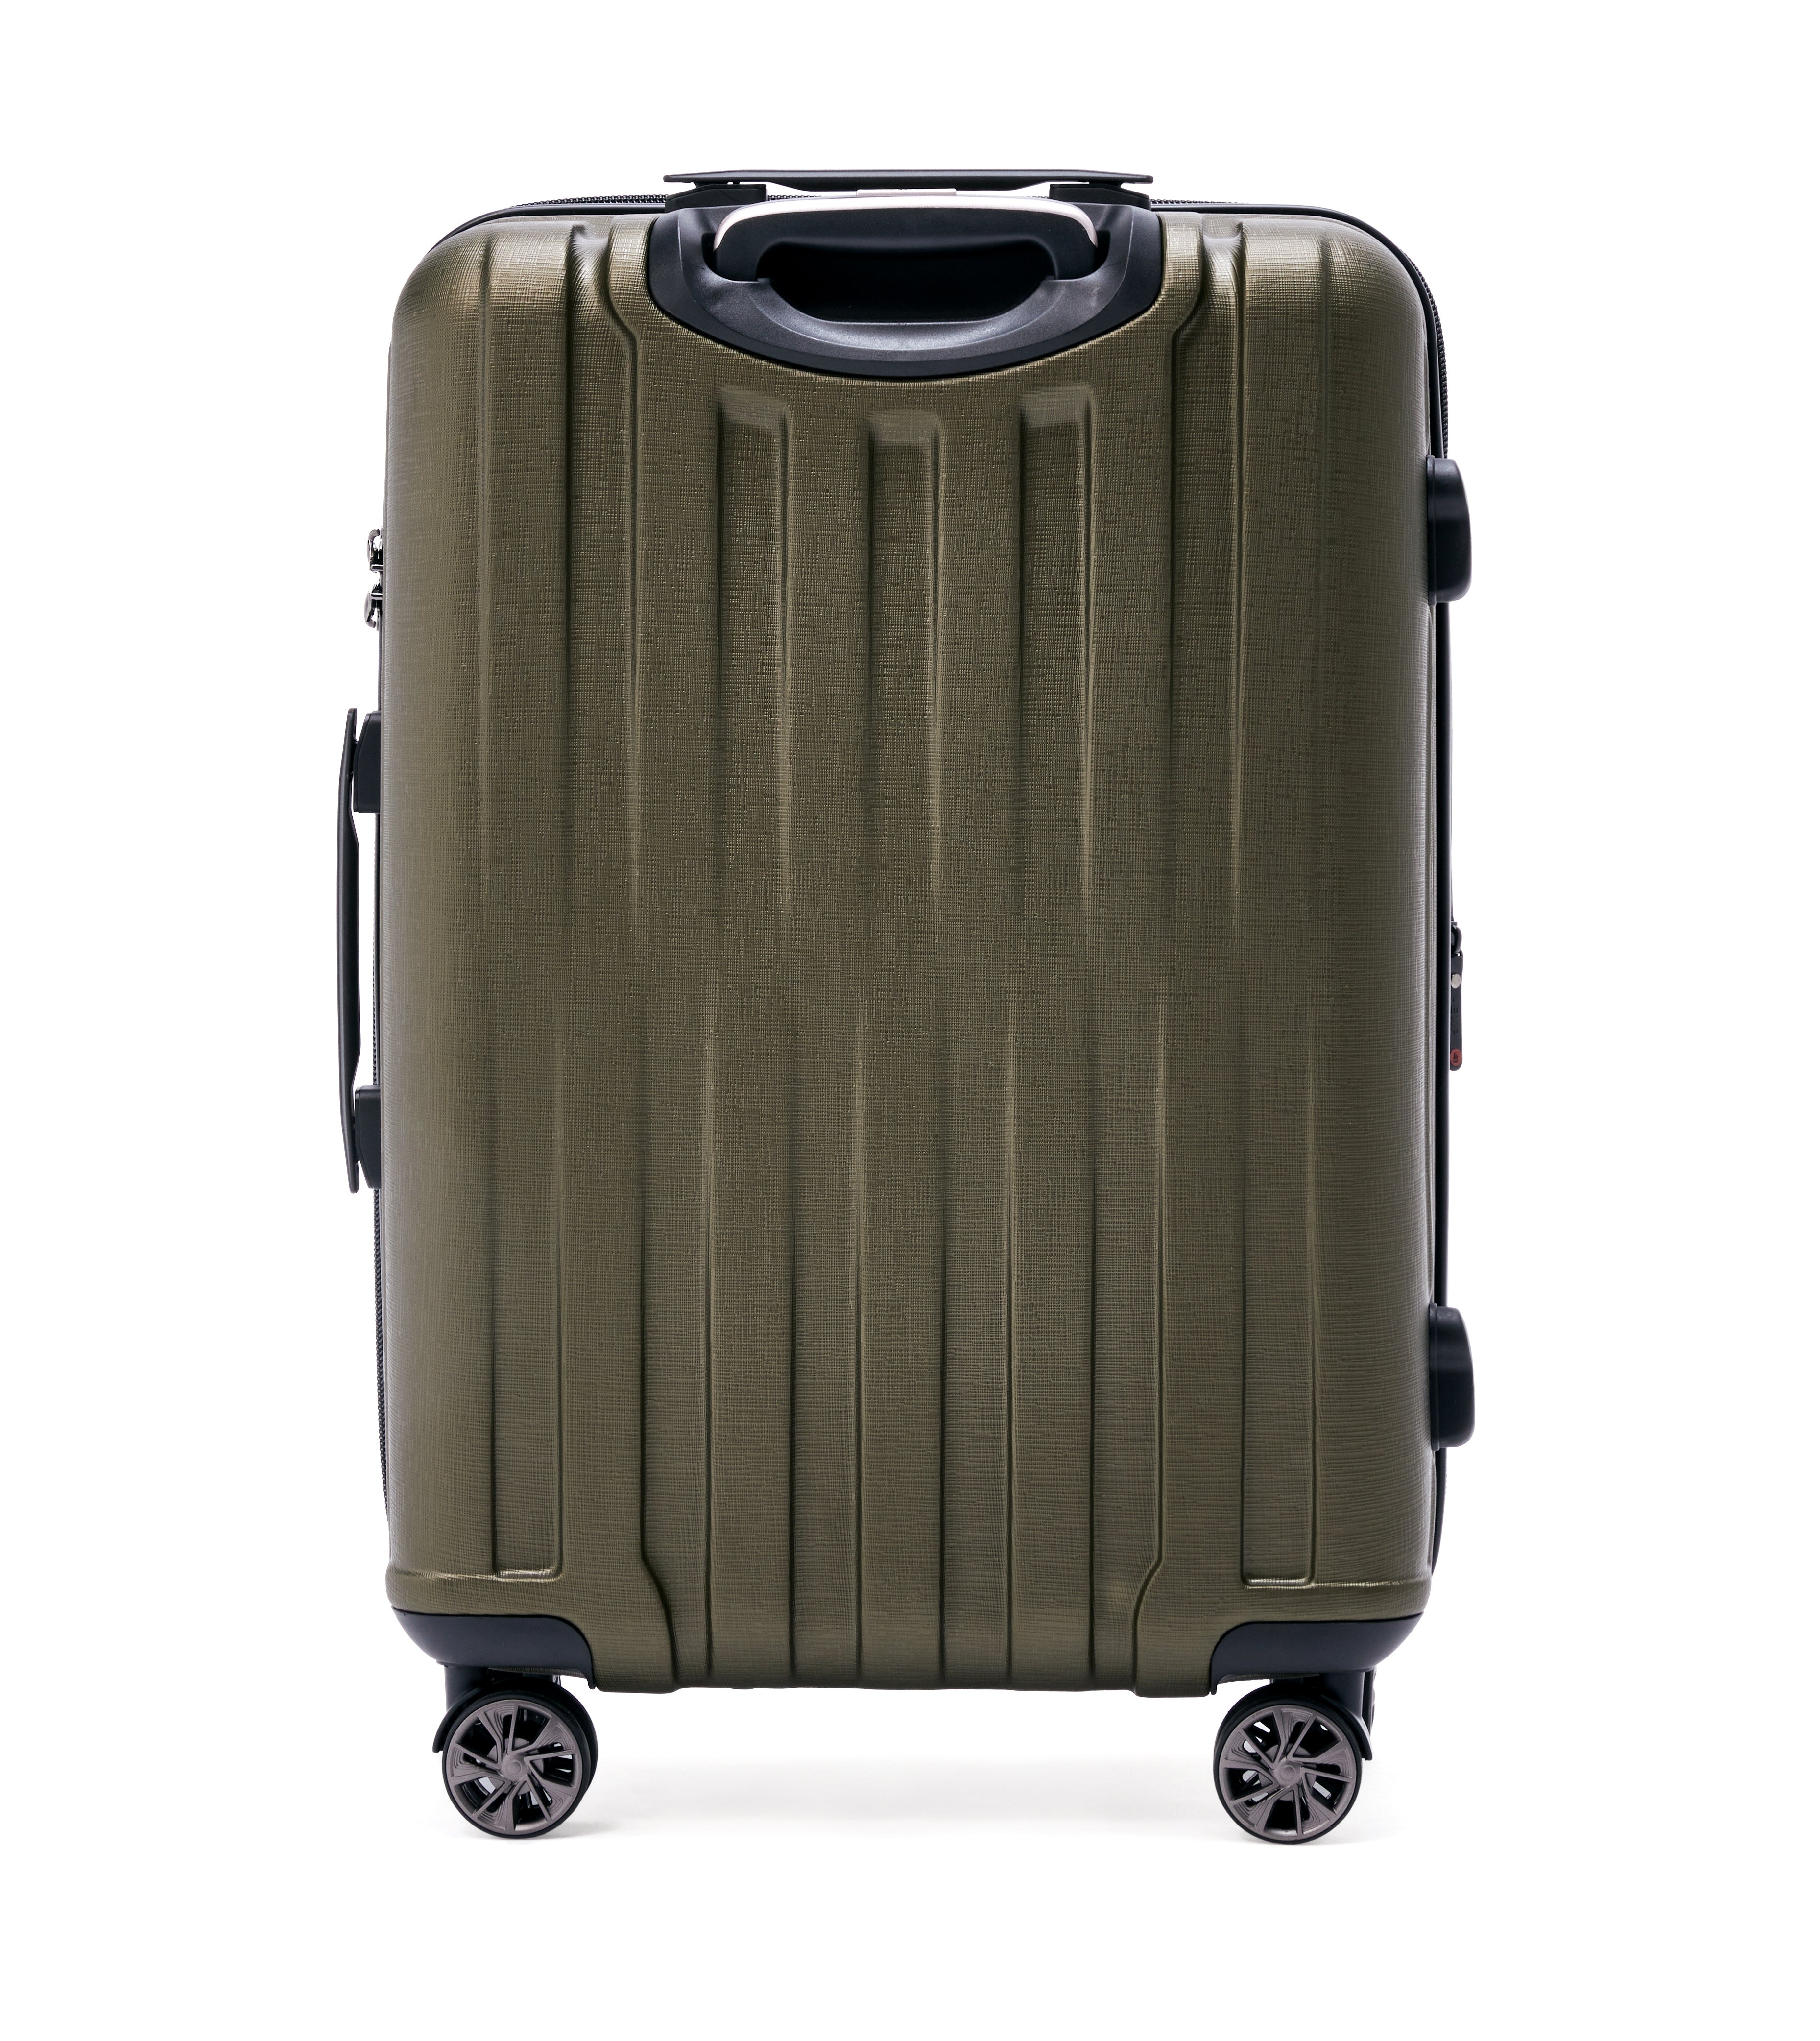 Sidewinder 21" Expandable Carry-On Spinner Polycarbonate Luggage with TSA Lock System